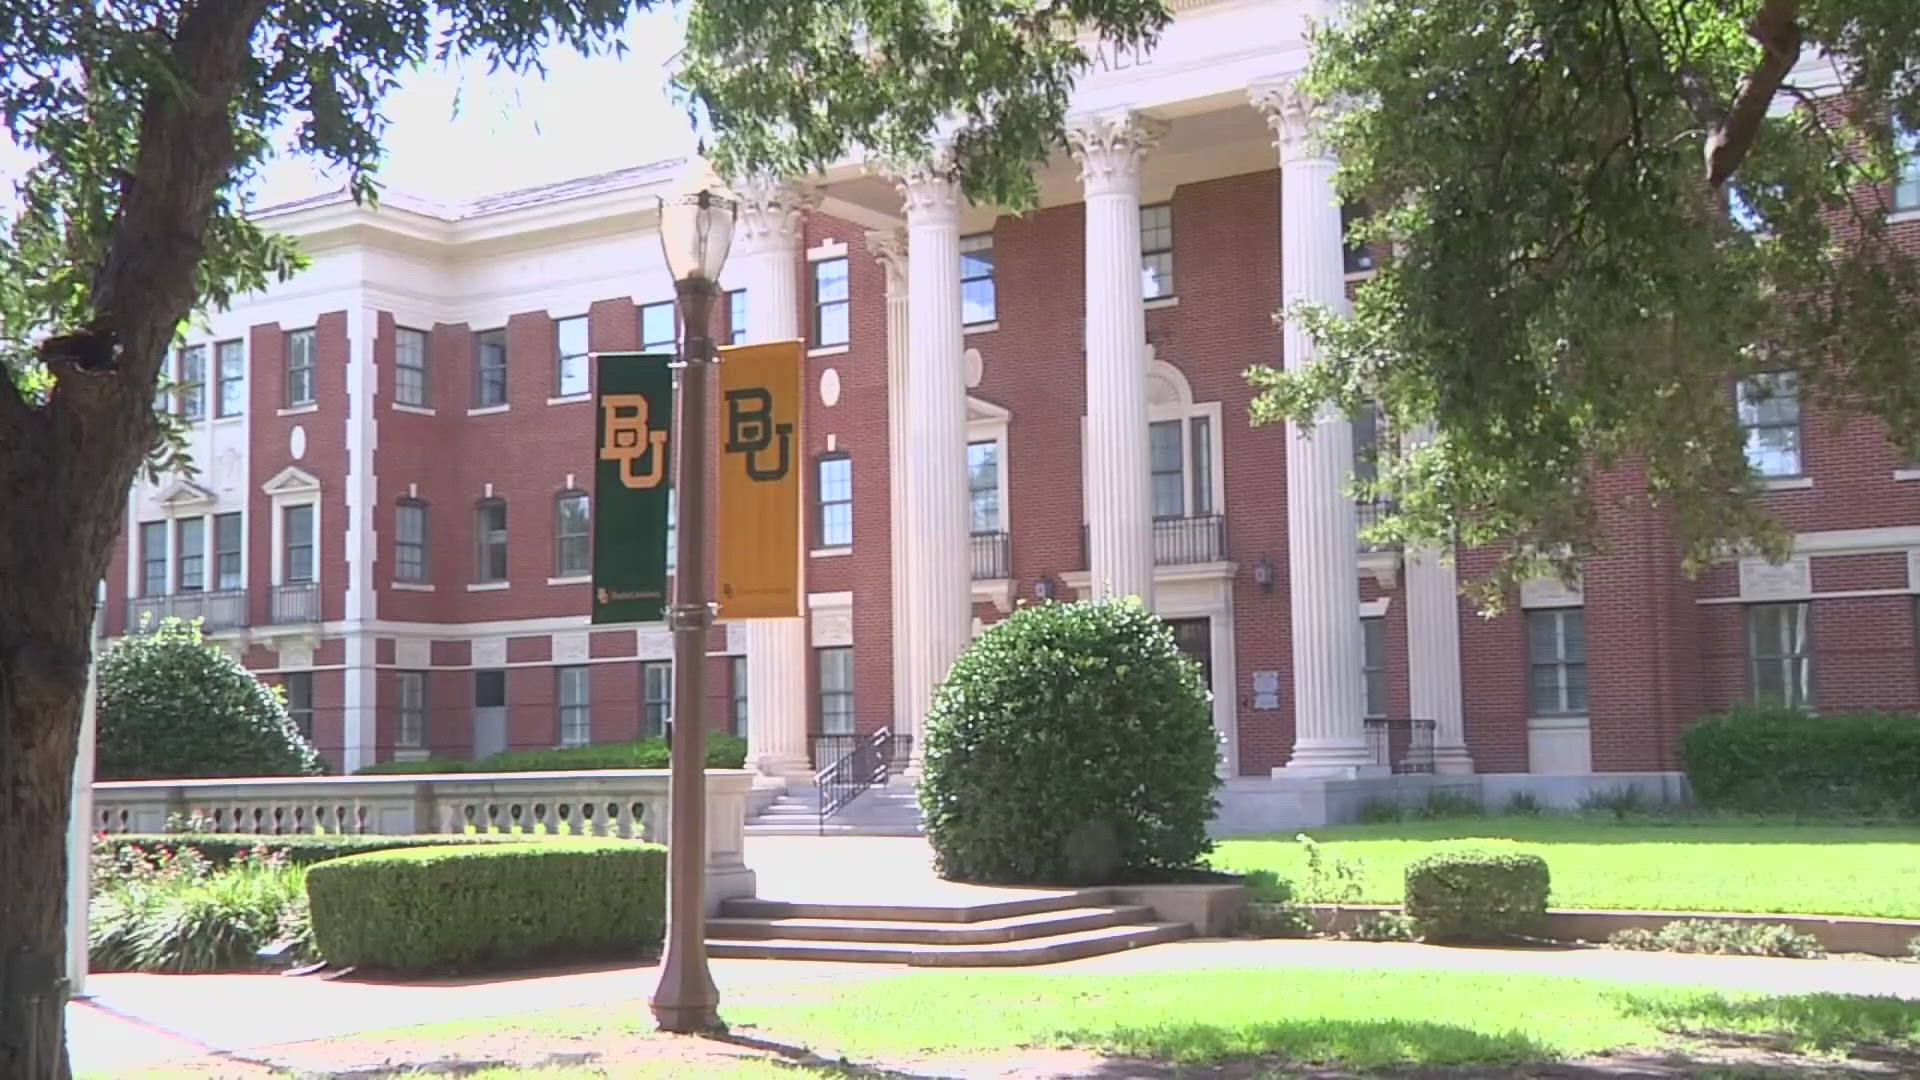 The campaign is now the most successful comprehensive fundraising campaign in Baylor history, said the university.